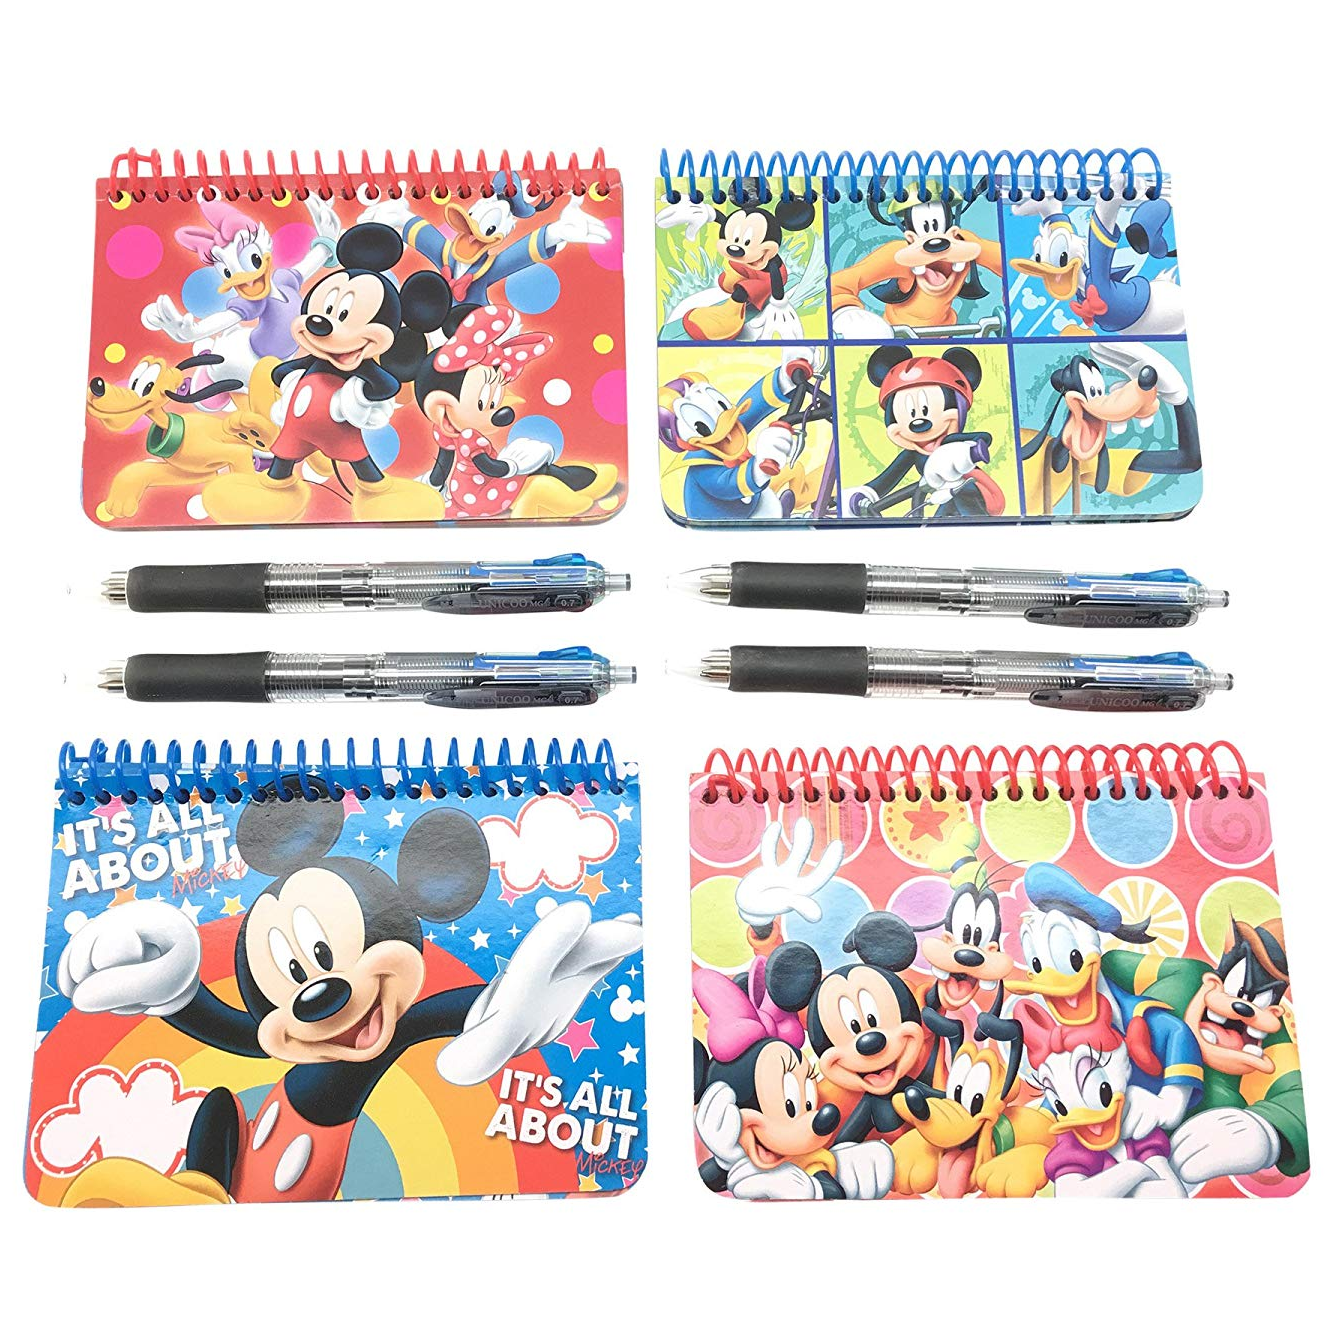 Official Disney Autograph Books + Pens (4 Pack) Only $28.95 Shipped!